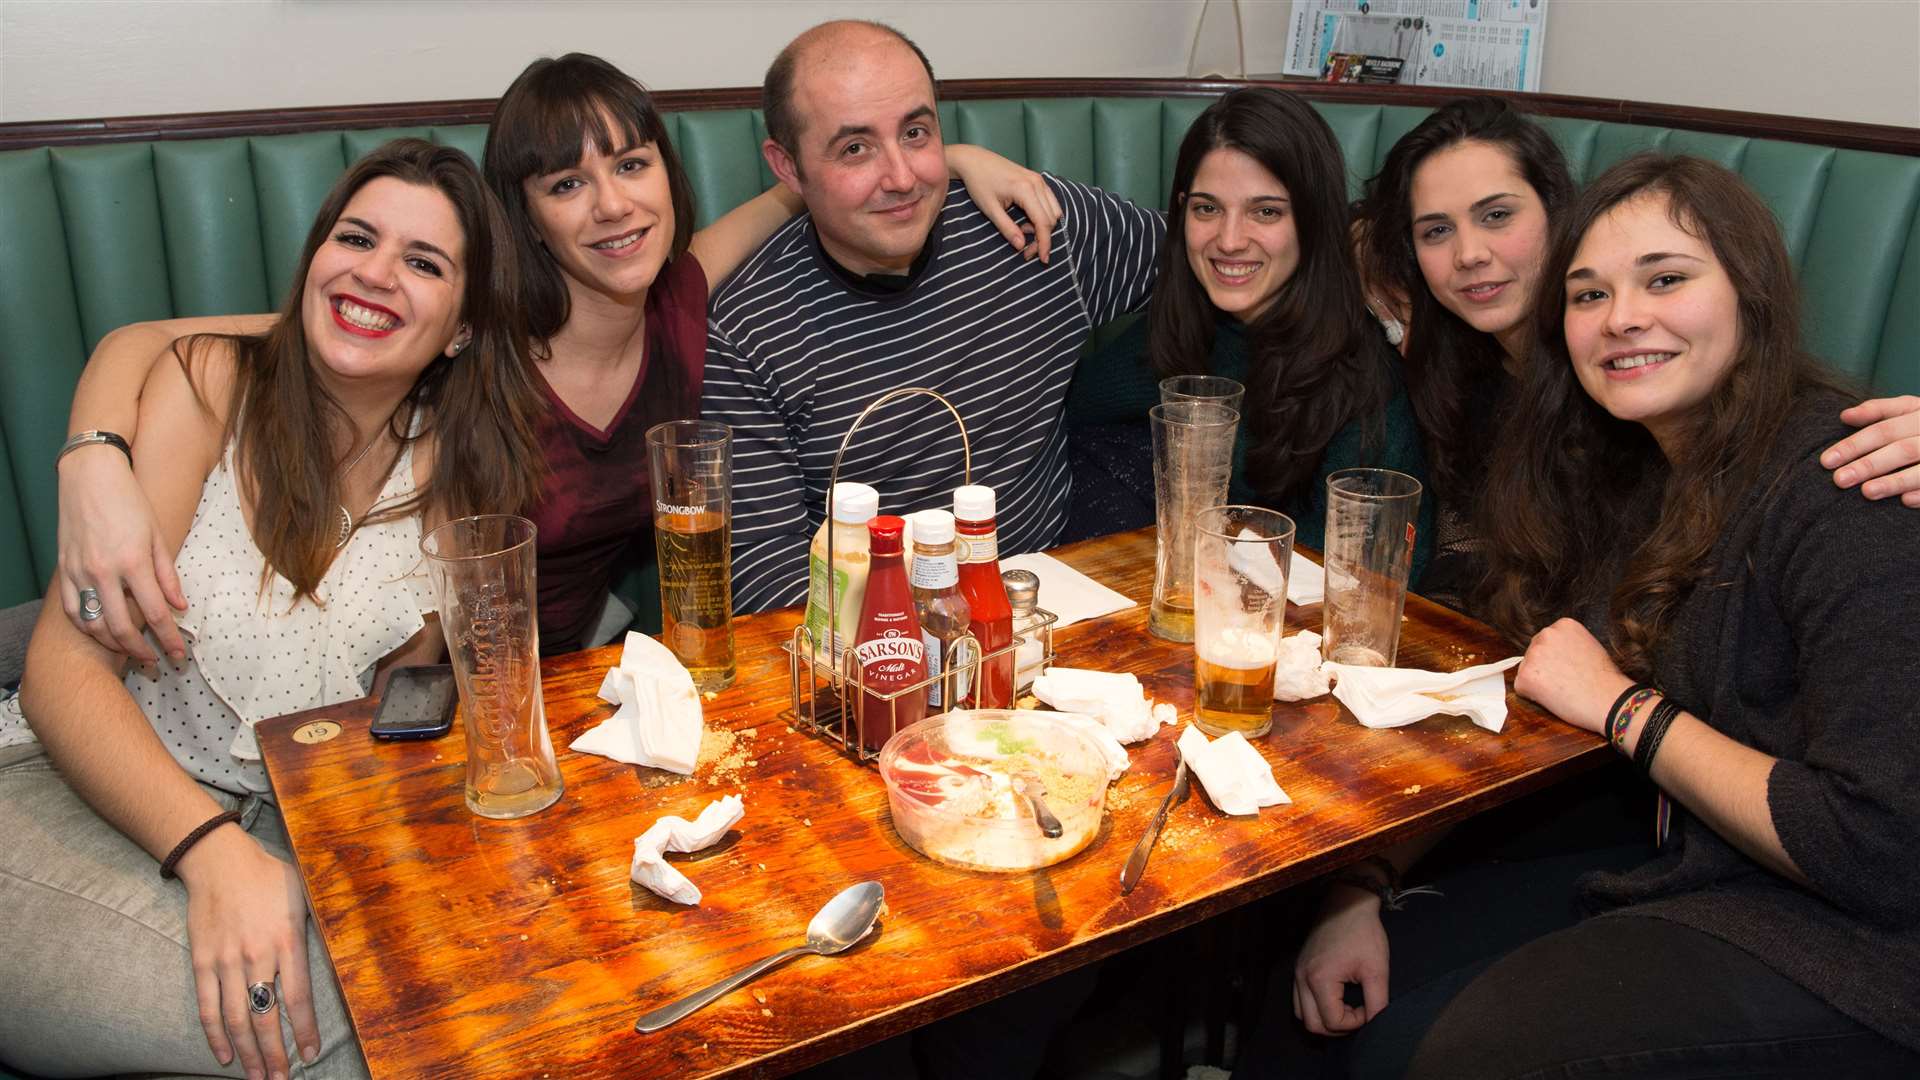 CitySeen 17JAN2015..Alicia Garcia (left) celebrating her 27th birthday with friends and family...Picture: Callum Mackay. Image No. 027861.